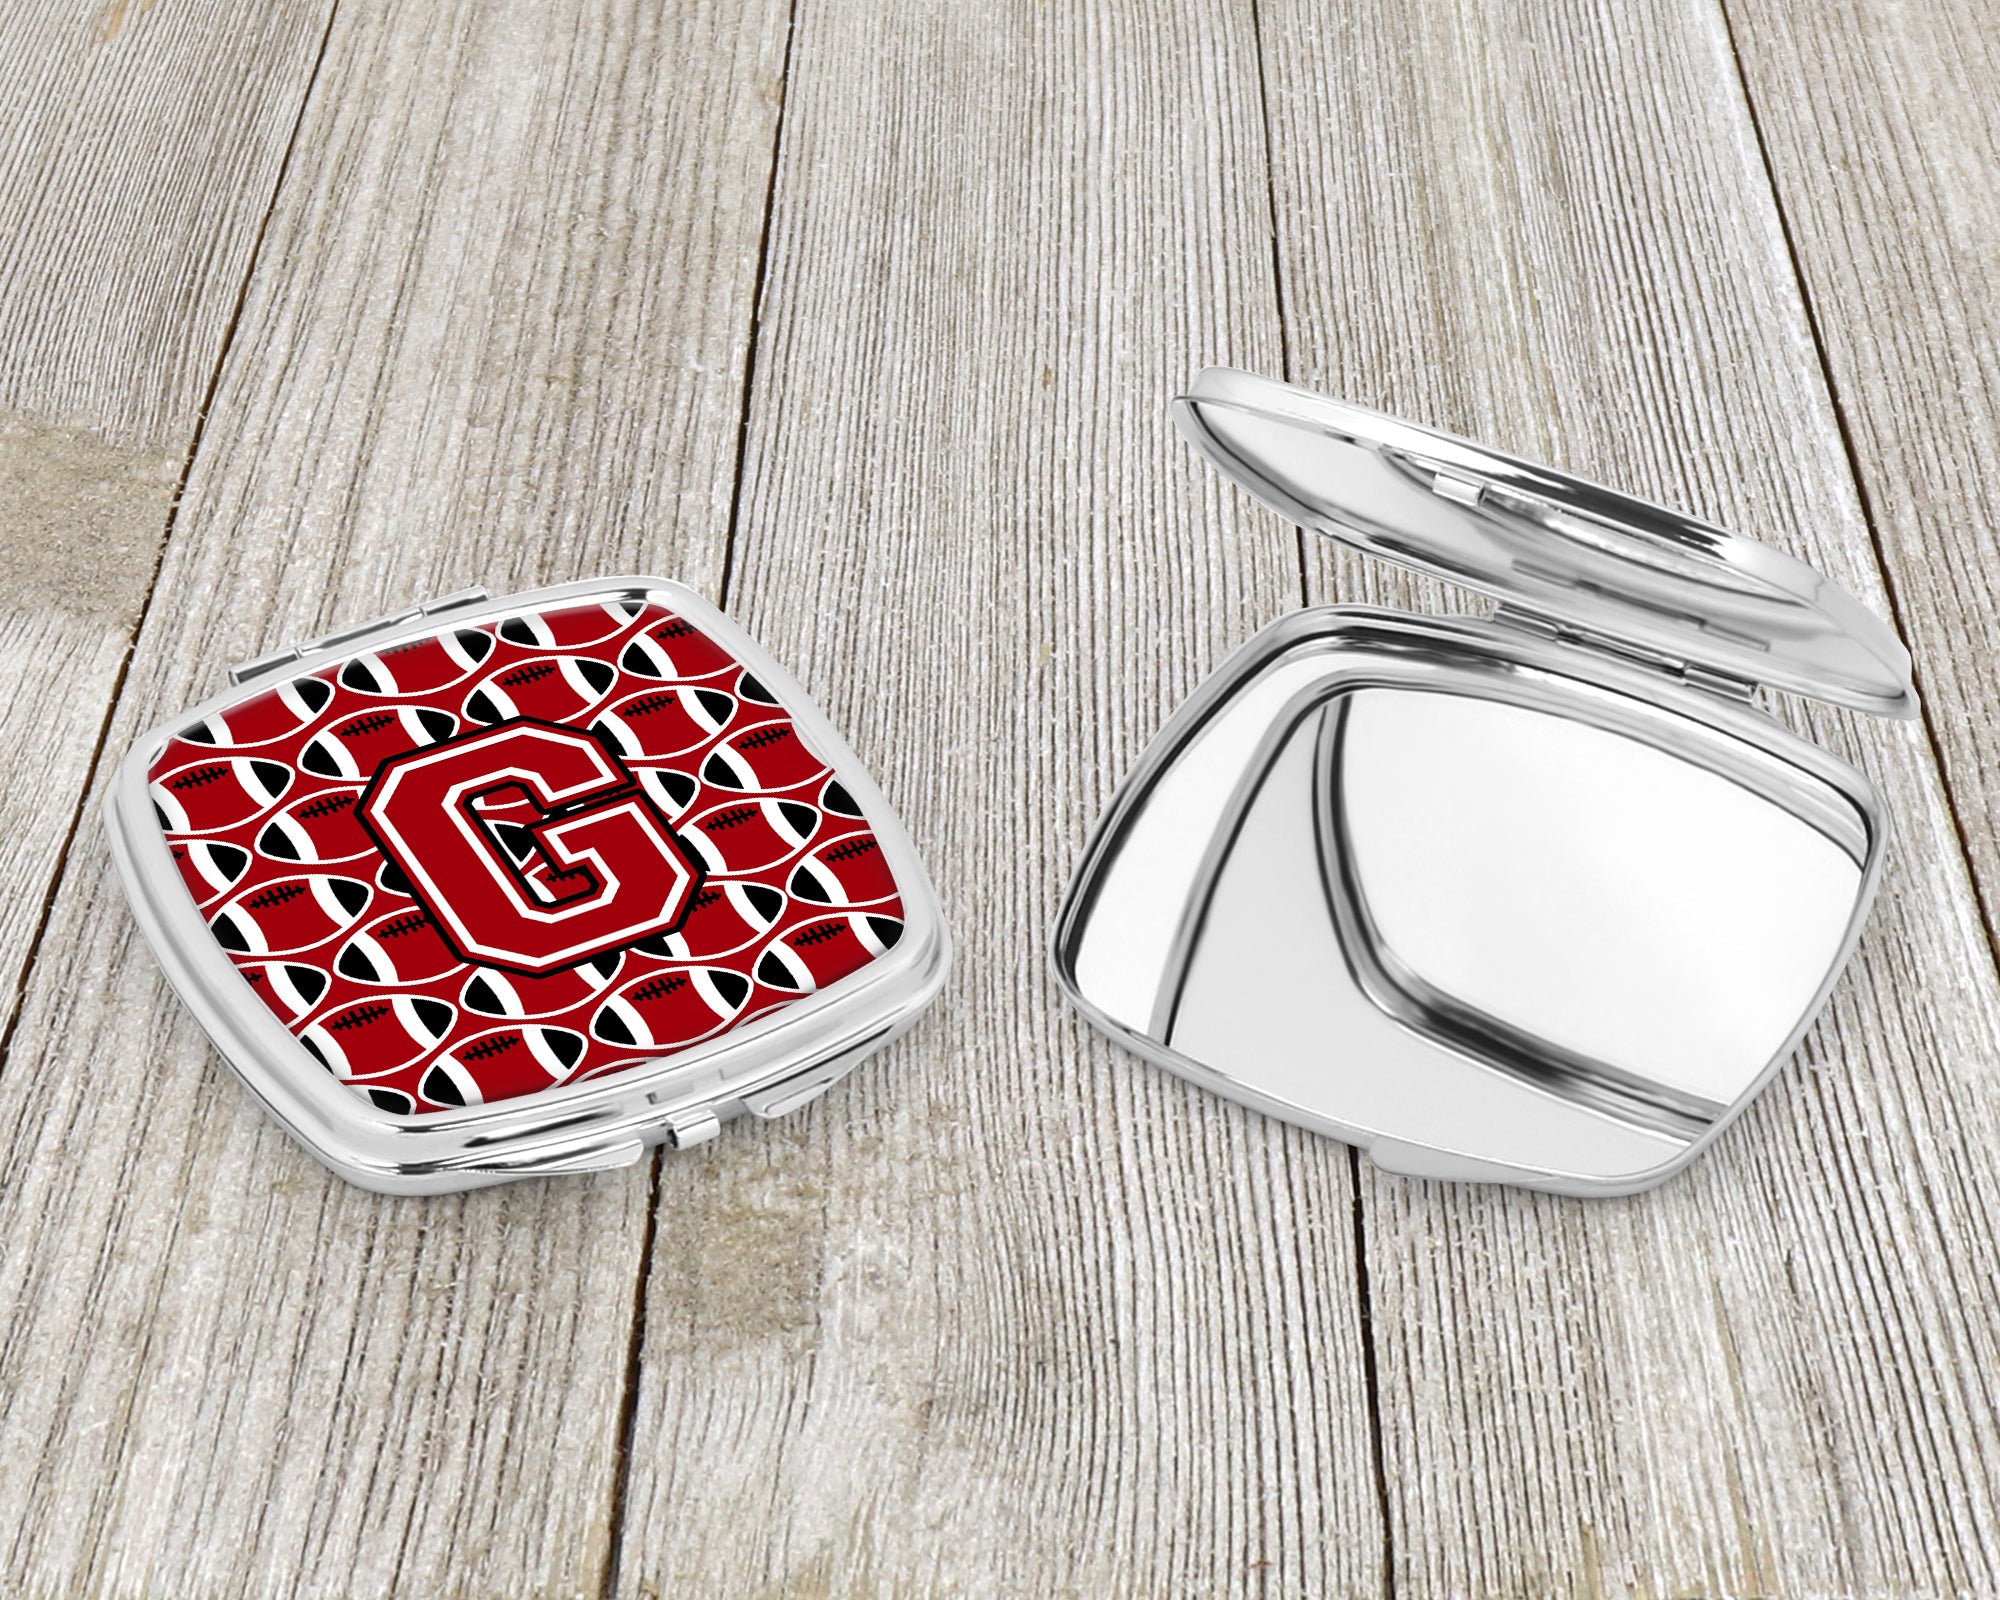 Letter G Football Red, Black and White Compact Mirror CJ1073-GSCM